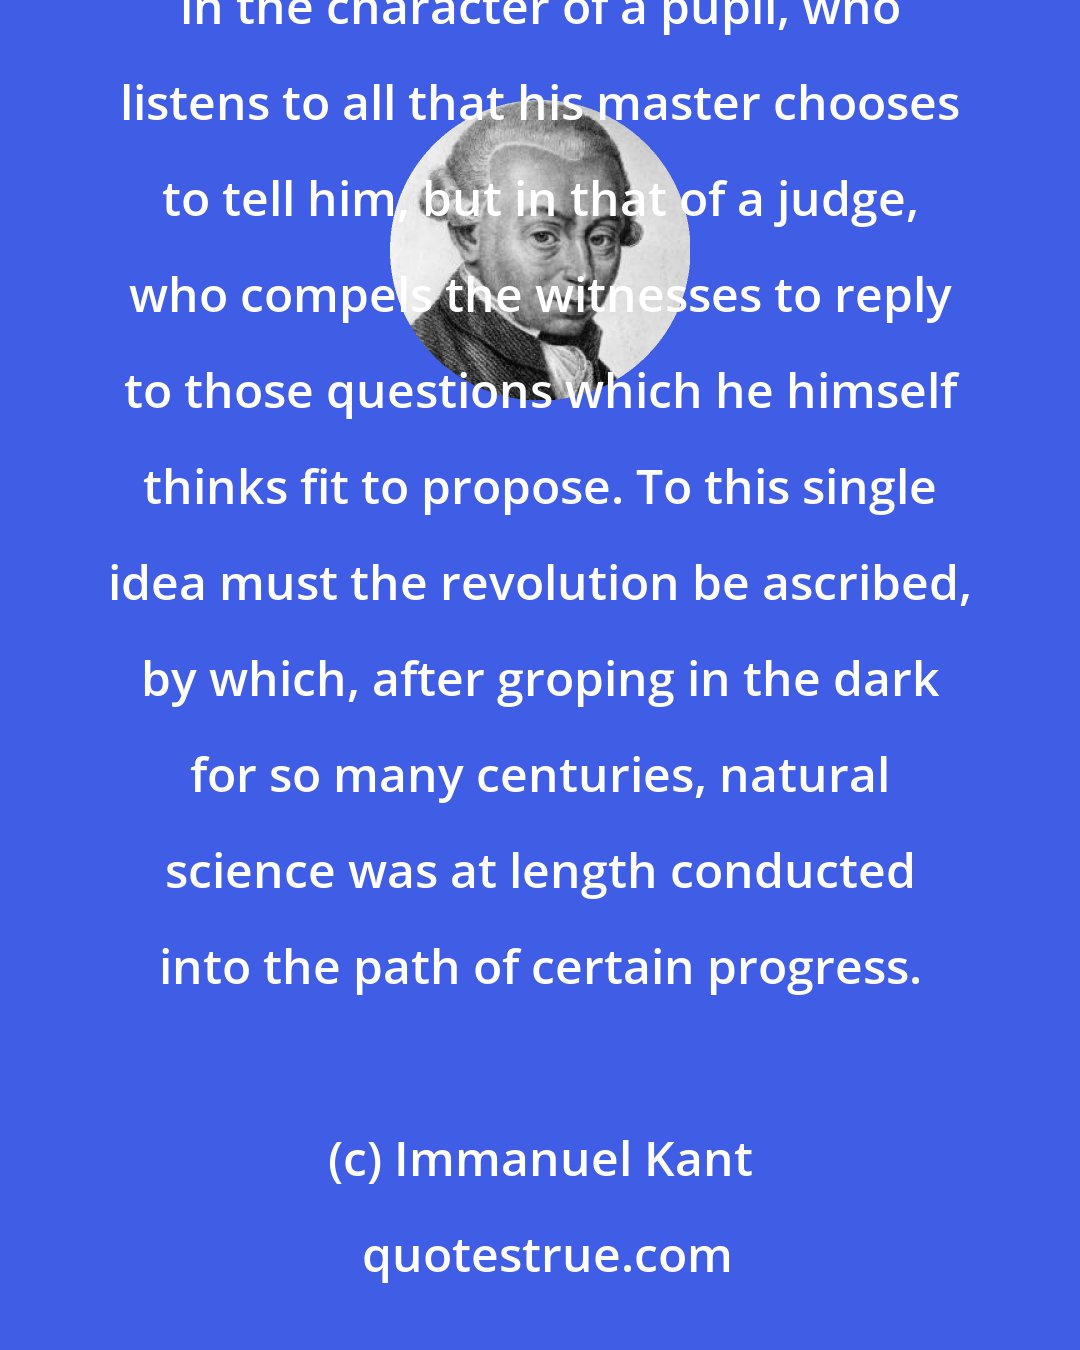 Immanuel Kant: Reason must approach nature with the view, indeed, of receiving information from it, not, however, in the character of a pupil, who listens to all that his master chooses to tell him, but in that of a judge, who compels the witnesses to reply to those questions which he himself thinks fit to propose. To this single idea must the revolution be ascribed, by which, after groping in the dark for so many centuries, natural science was at length conducted into the path of certain progress.